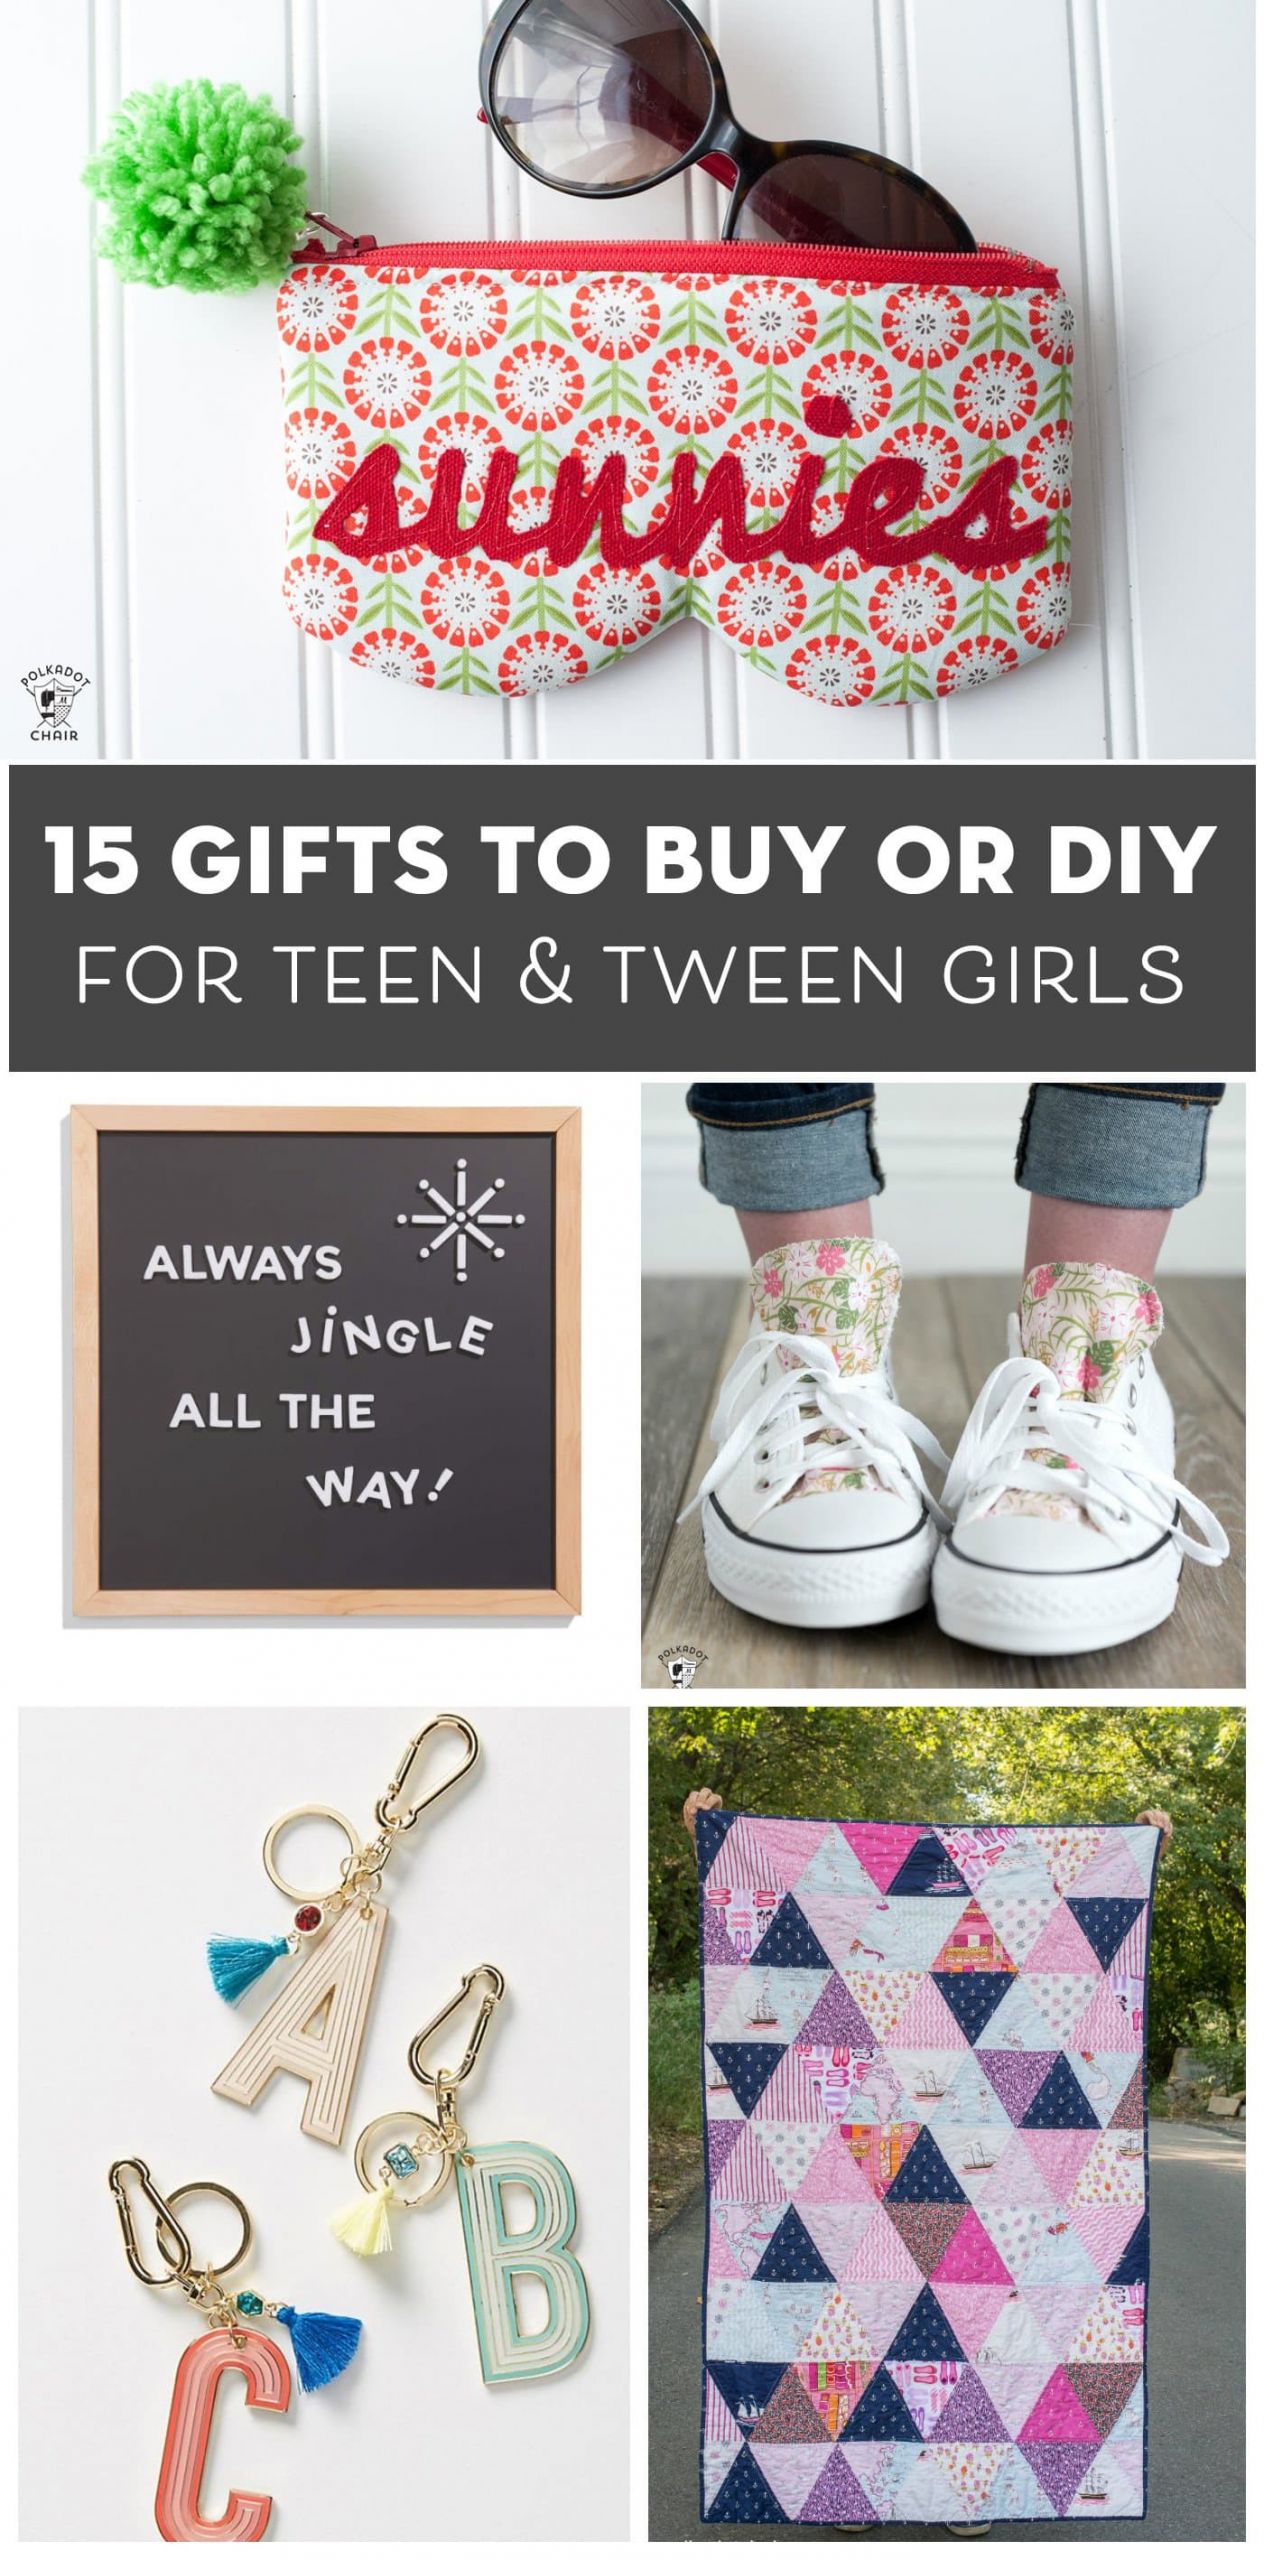 DIY Gift For Girls
 15 Gift Ideas for Teenage Girls That You Can DIY or Buy